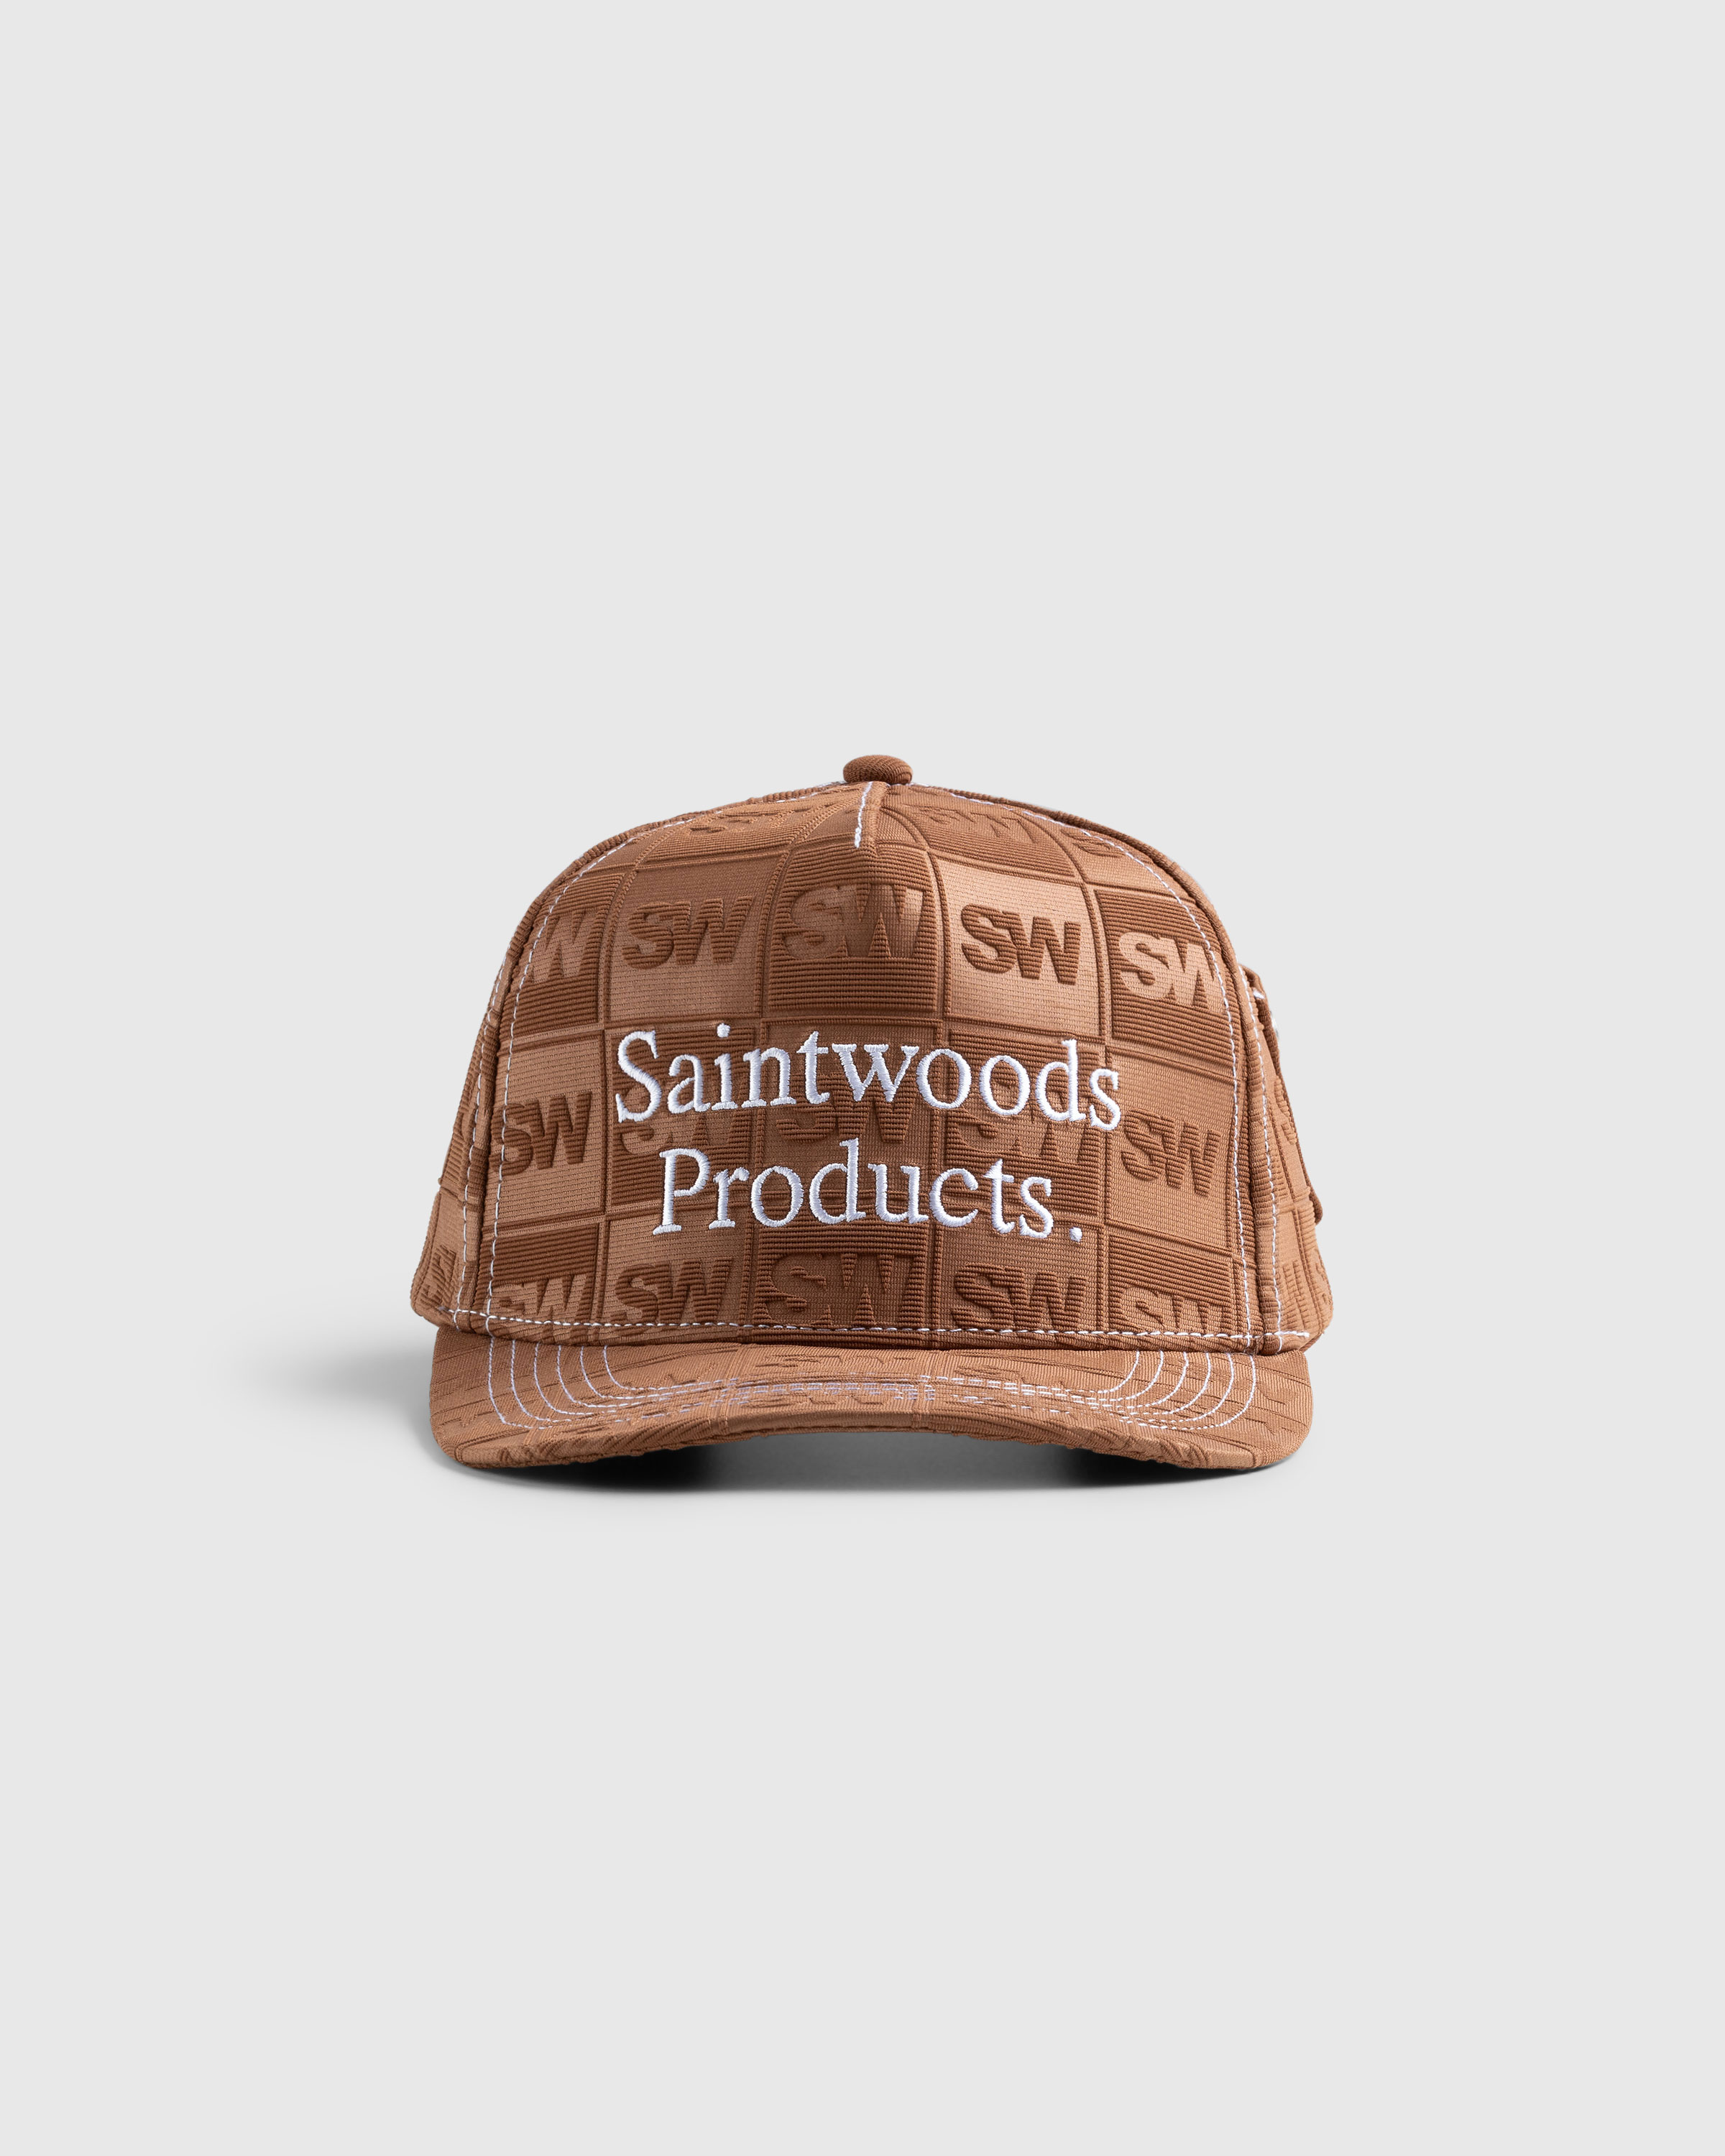 Saintwoods - SW Products Hat Brown - Accessories - Brown - Image 3